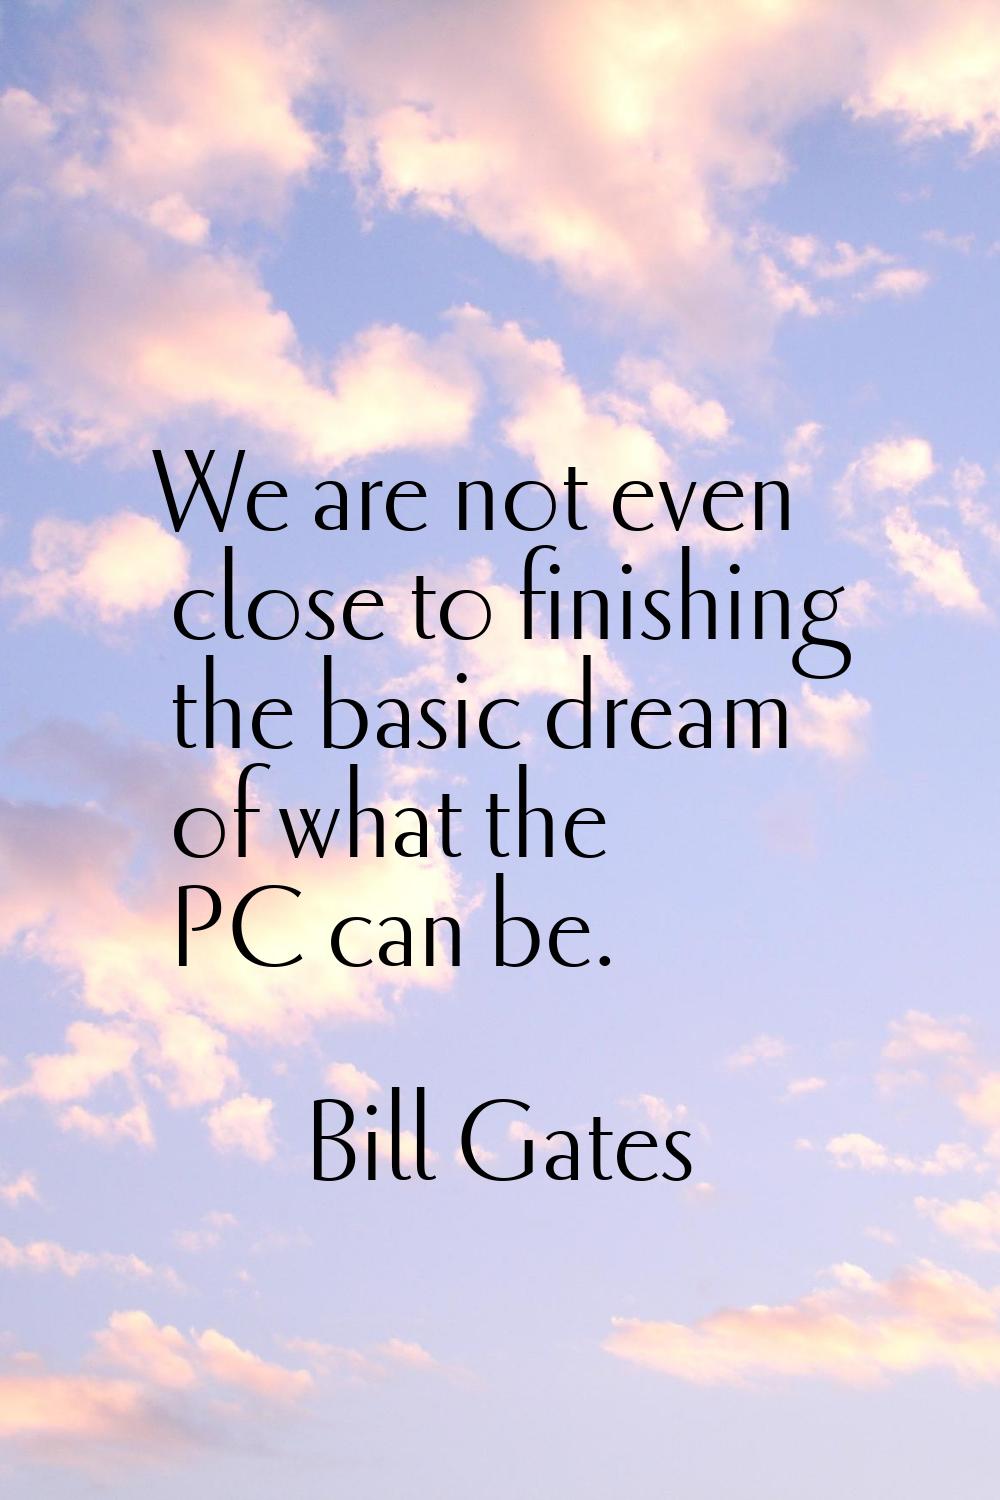 We are not even close to finishing the basic dream of what the PC can be.